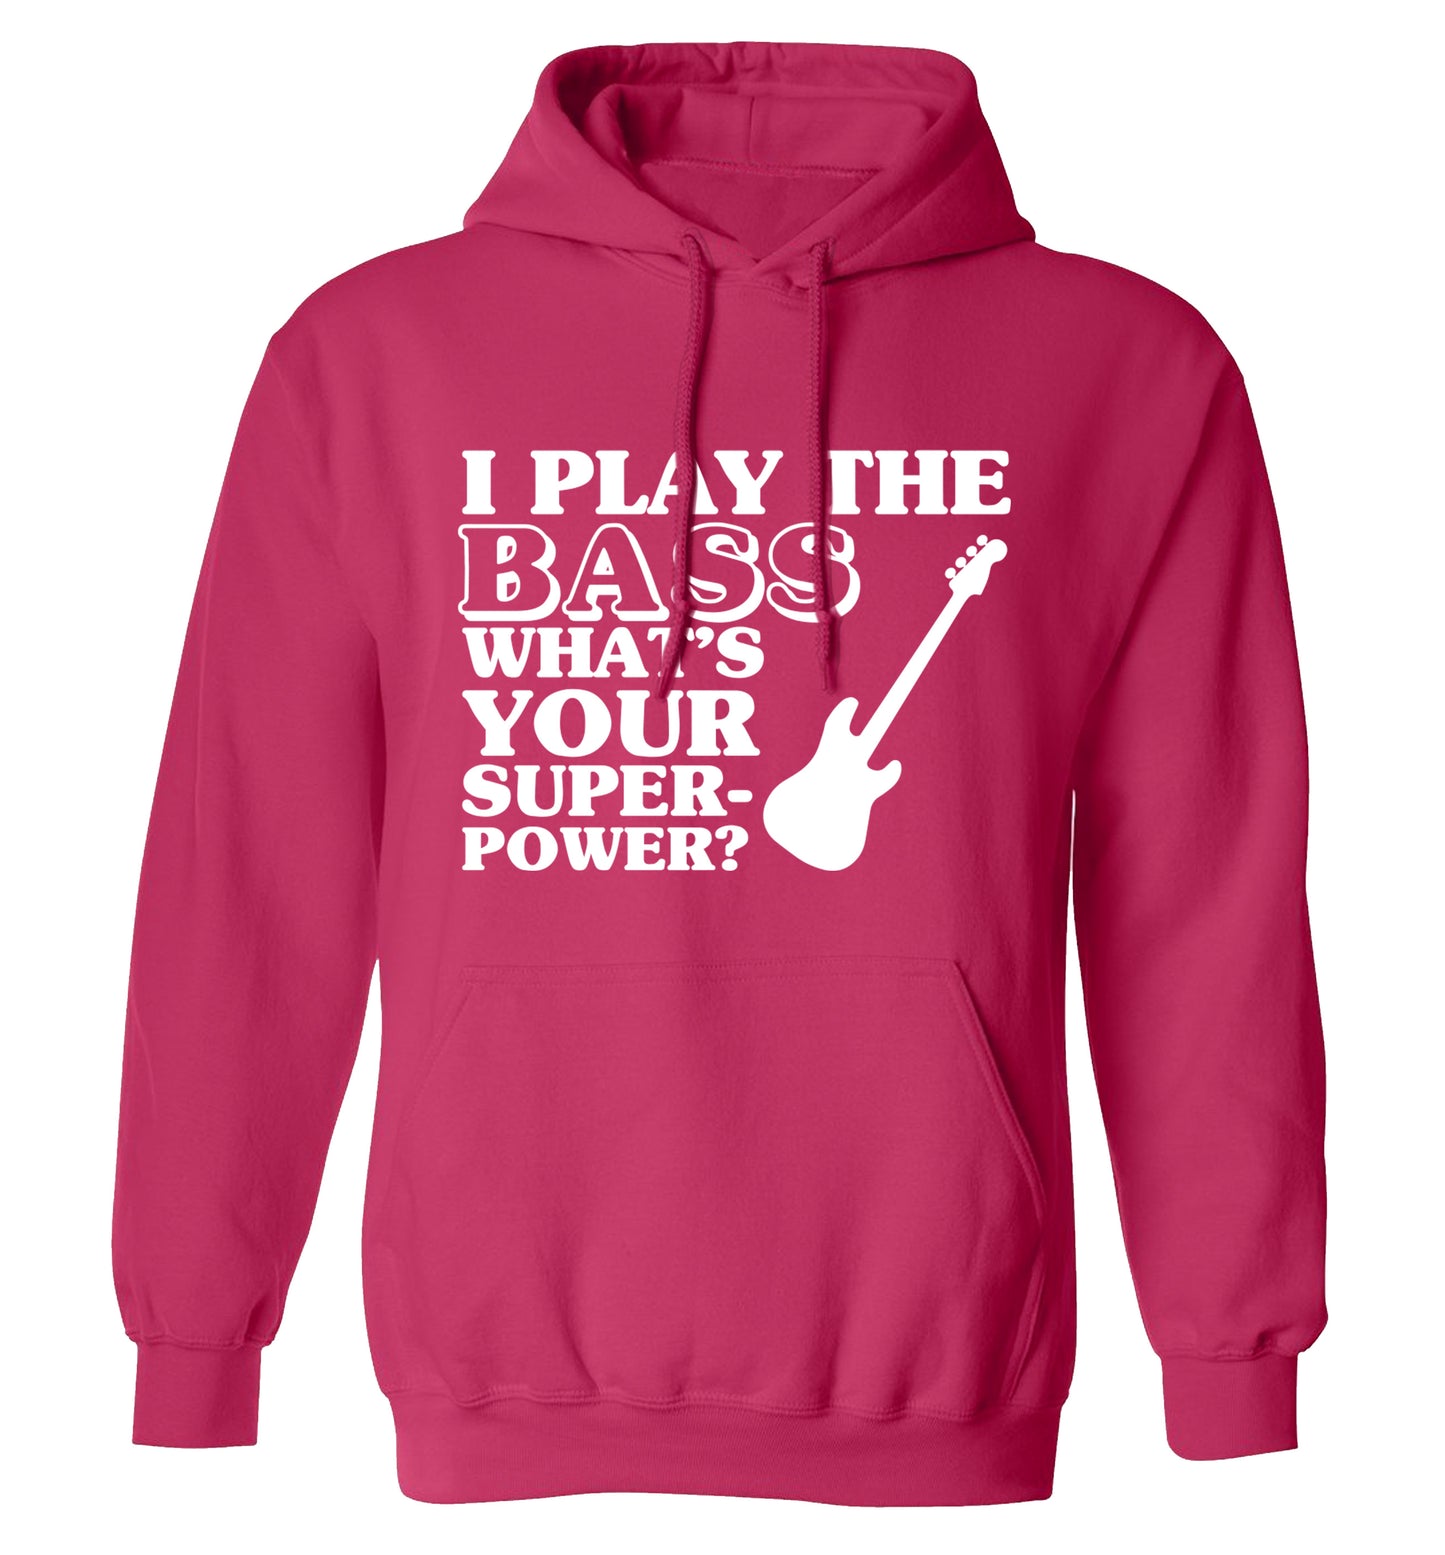 I play the bass what's your superpower? adults unisex pink hoodie 2XL